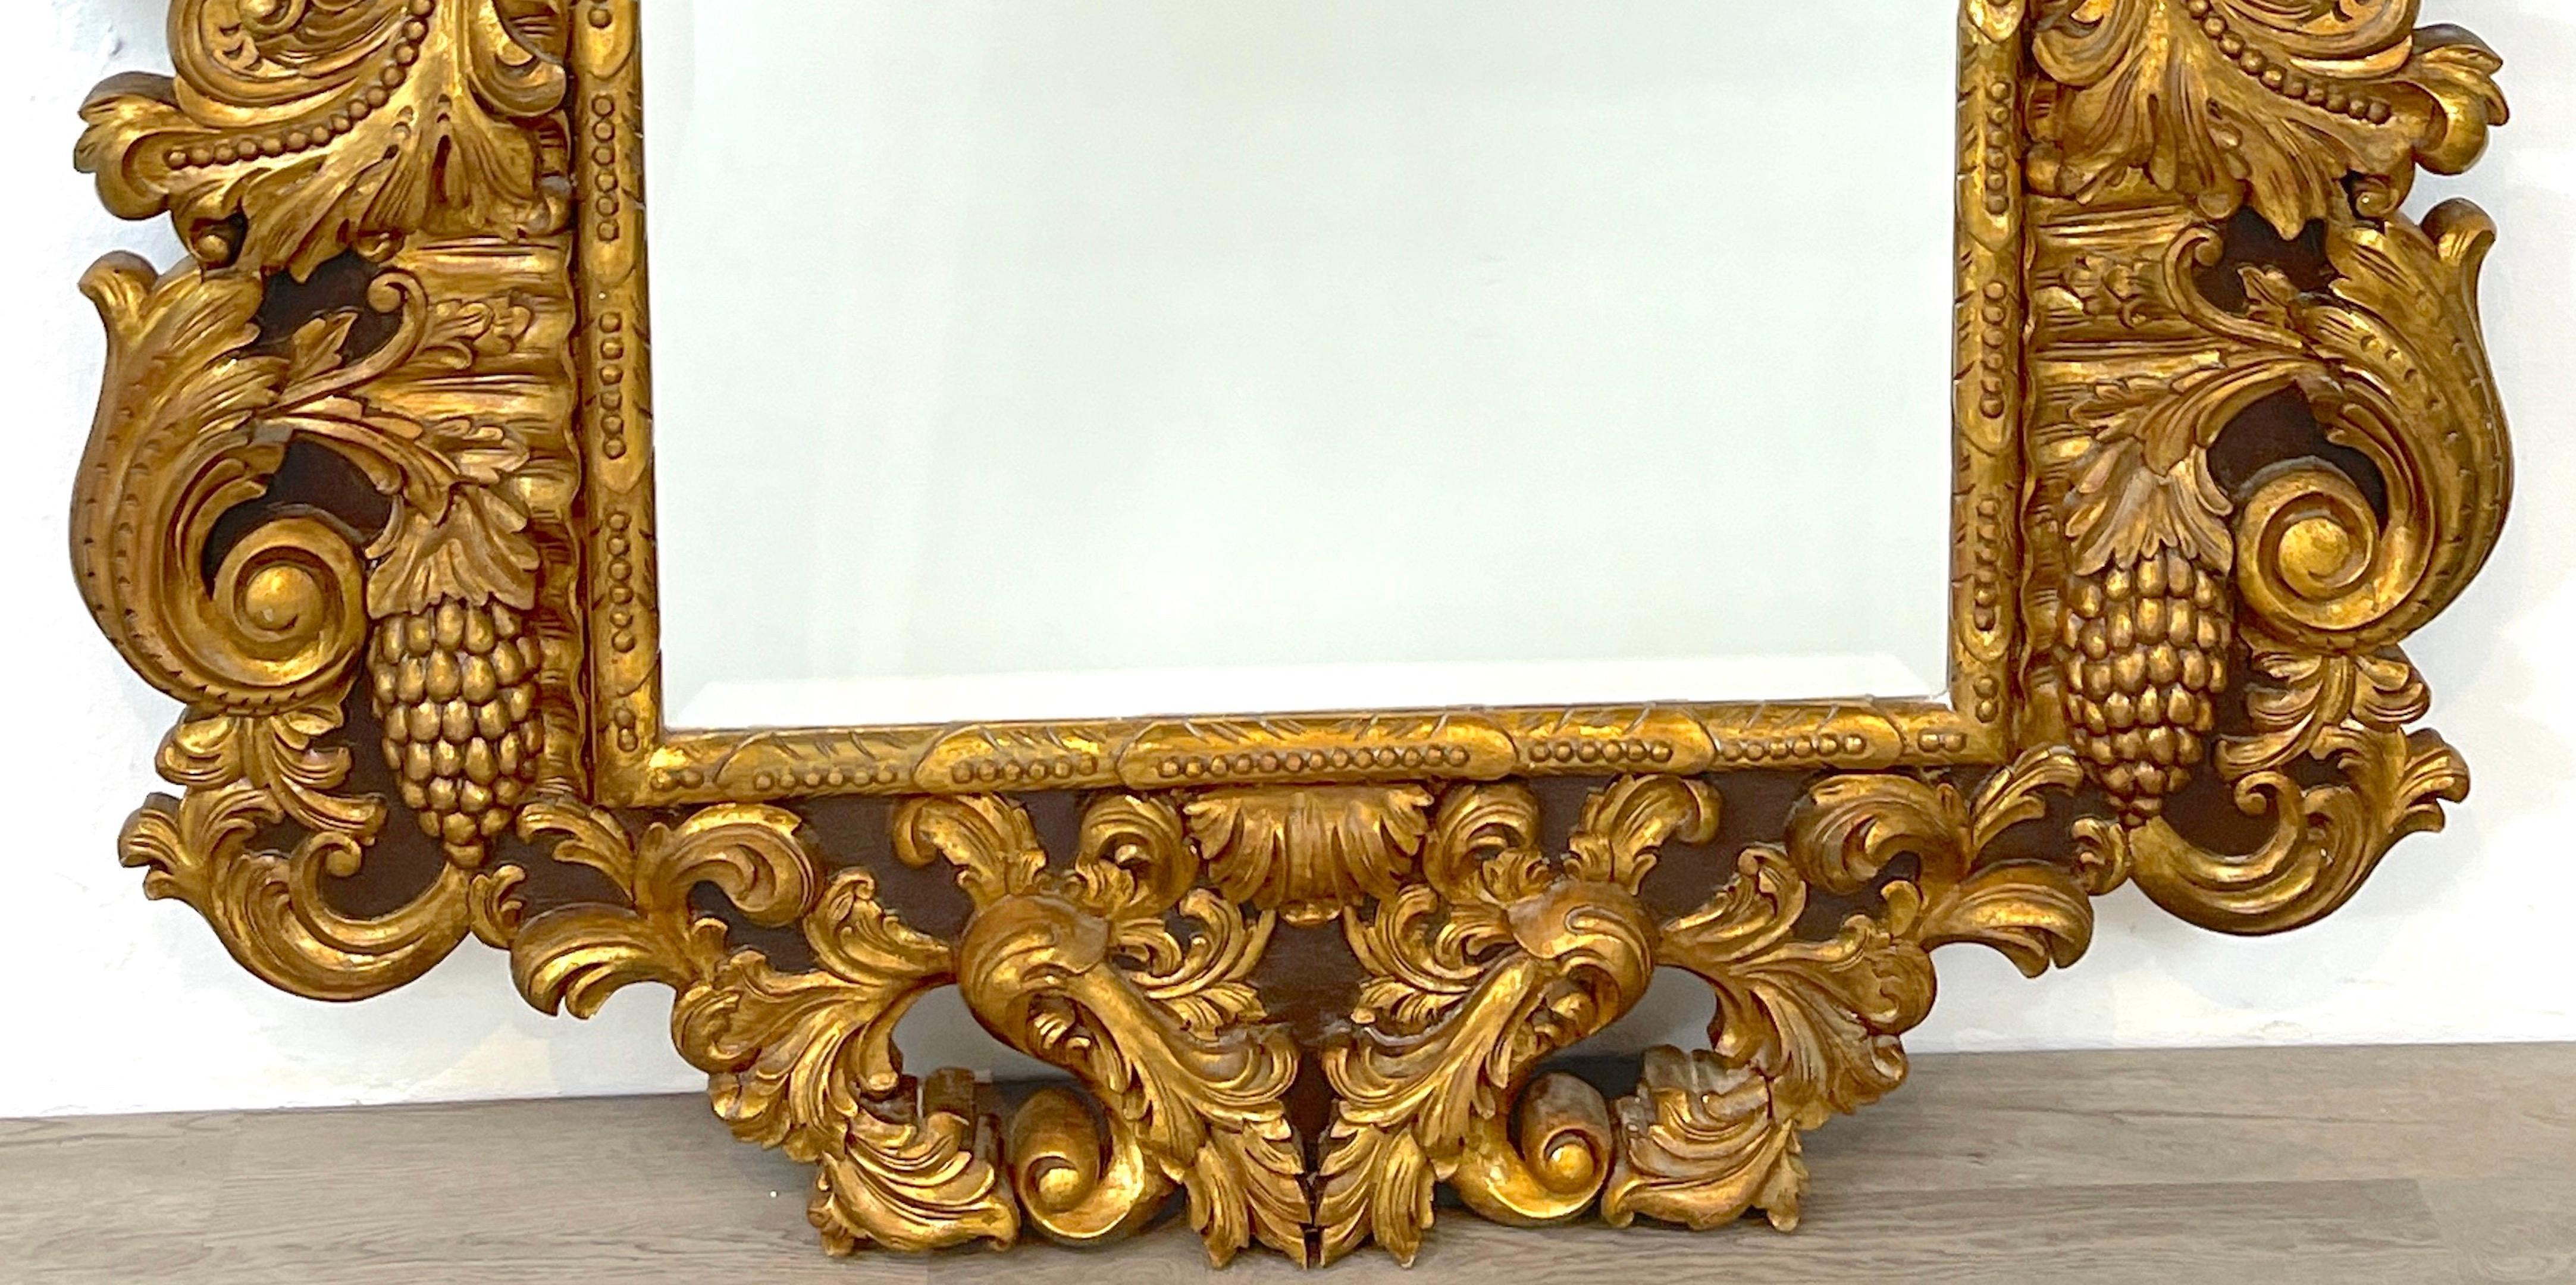 20th Century Palatial Italian Carved Figural Giltwood & Polychromed Baroque Style Mirror For Sale